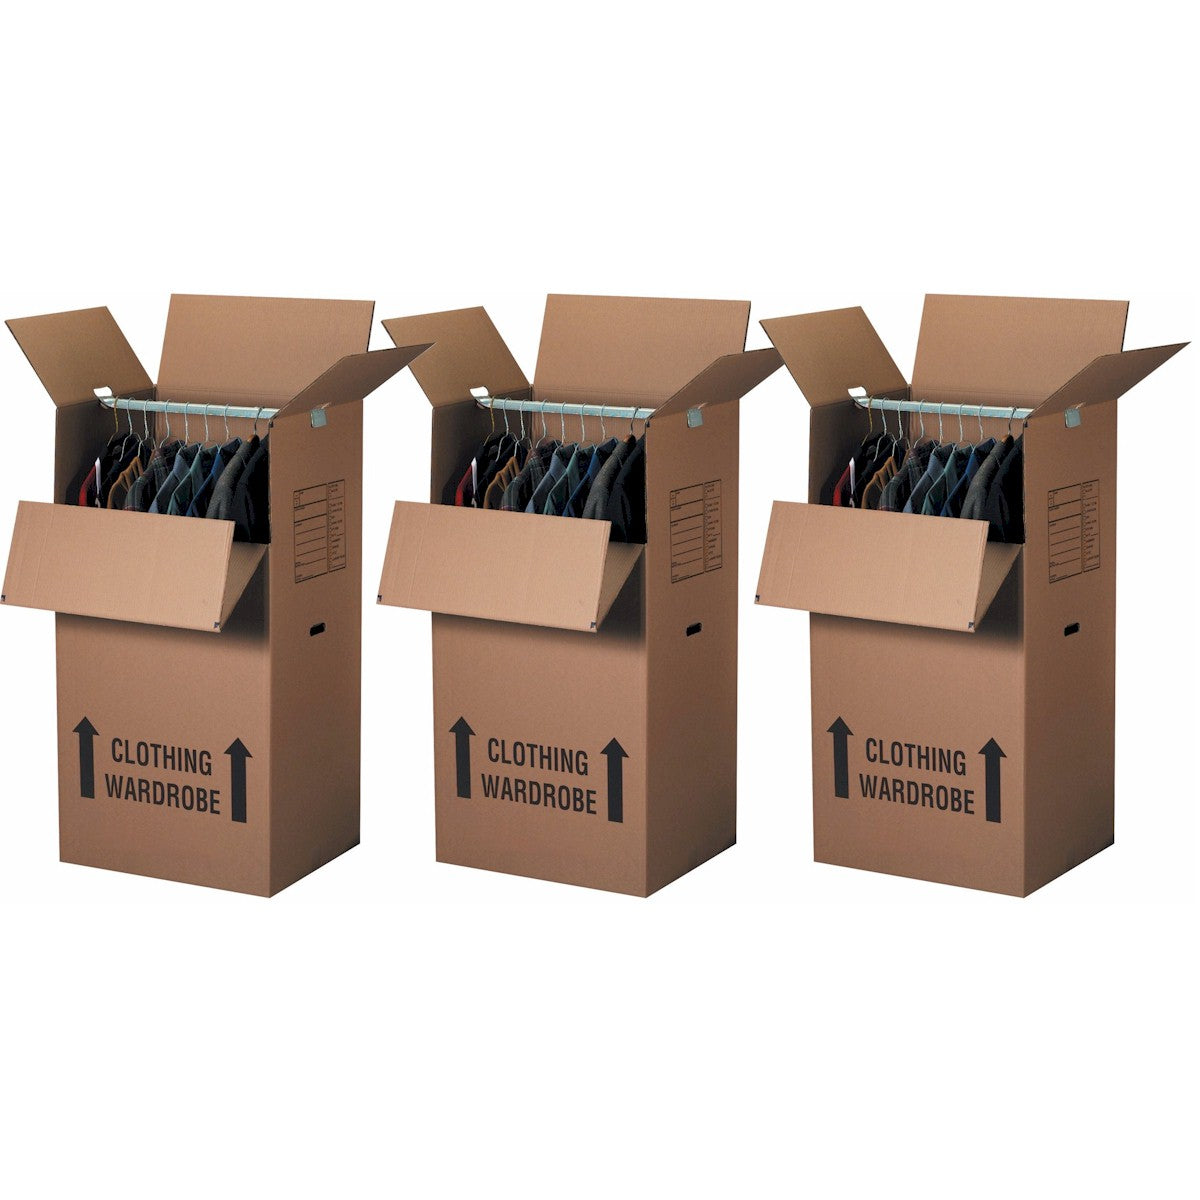 Uboxes Larger Wardrobe 24 x 24 x 40-Inches Moving Boxes Bundle of 3